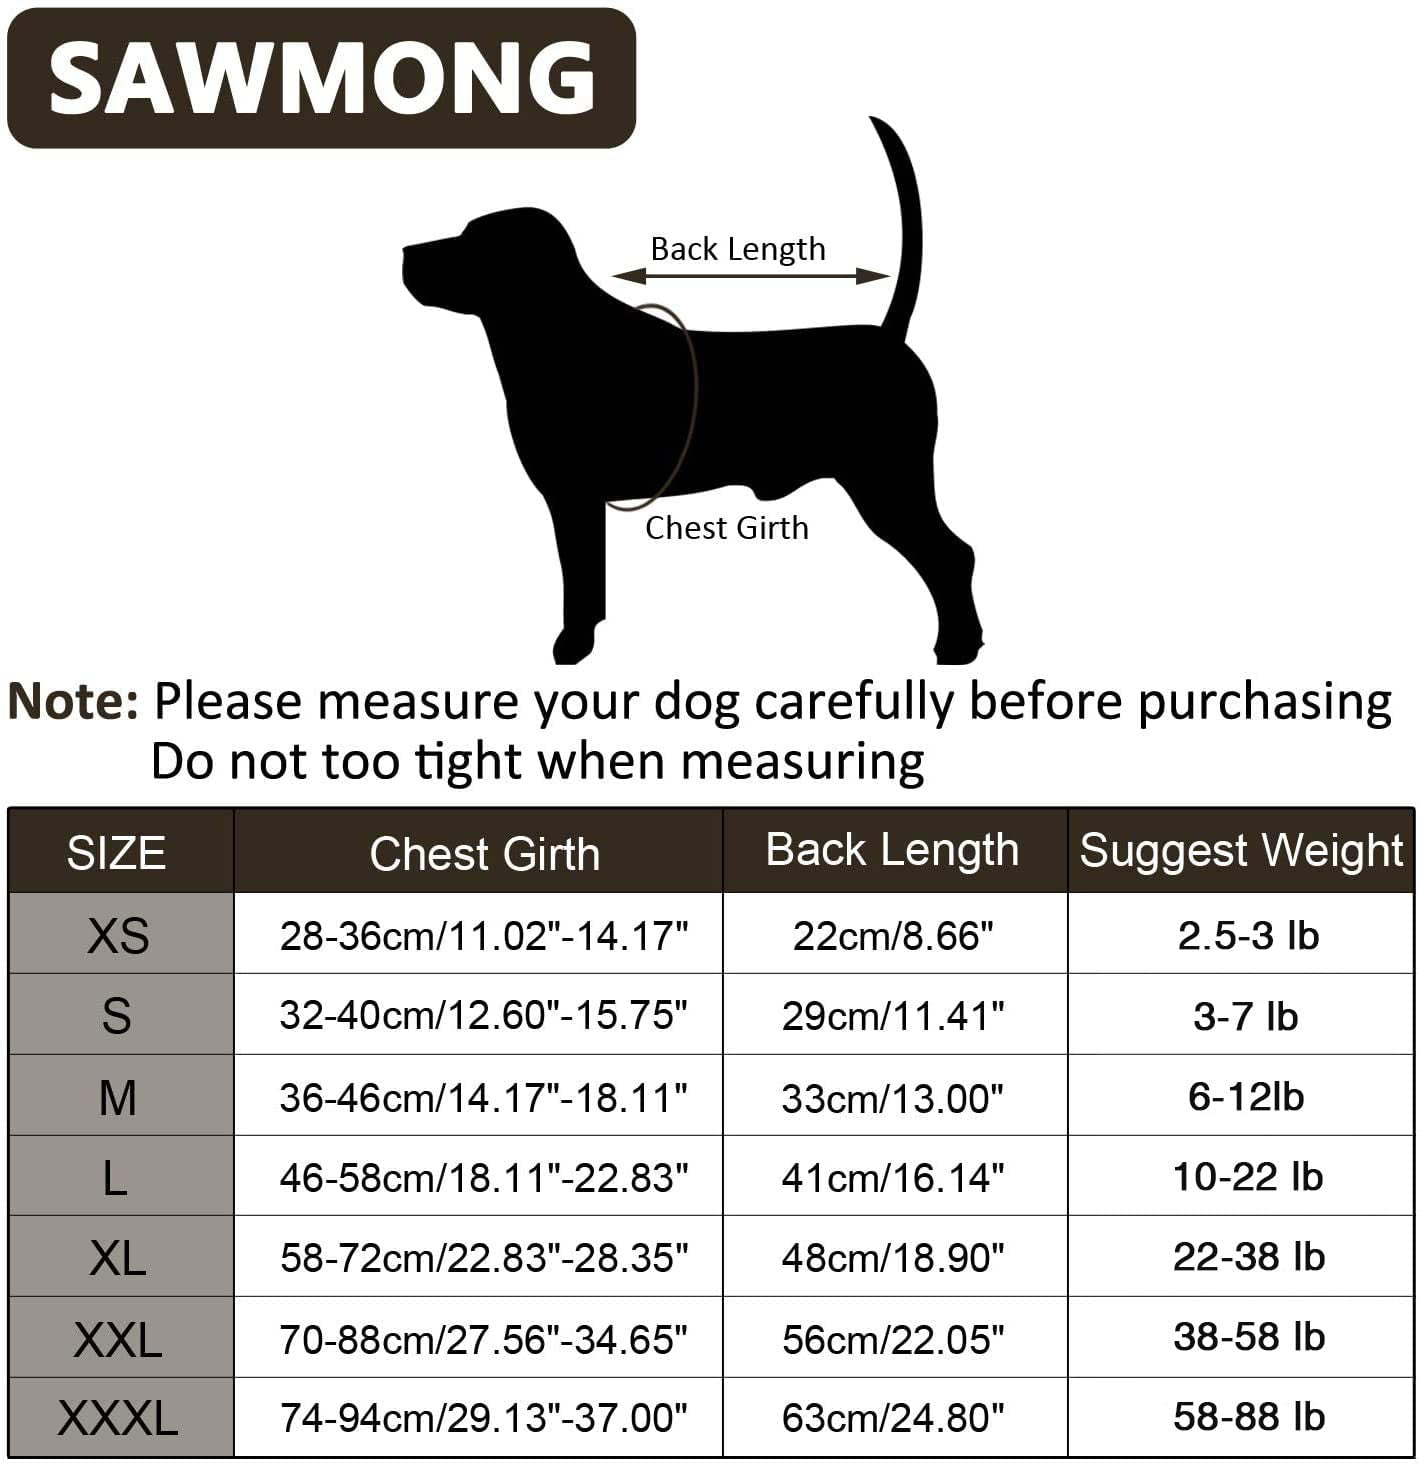 SAWMONG Recovery Suit for Dog Substitute E-Collar & Cone Dog Recovery Shirt for Abdominal Wounds Pet Surgery Surgical Recovery Snugly Suit Prevent Licking Dog Bodysuit